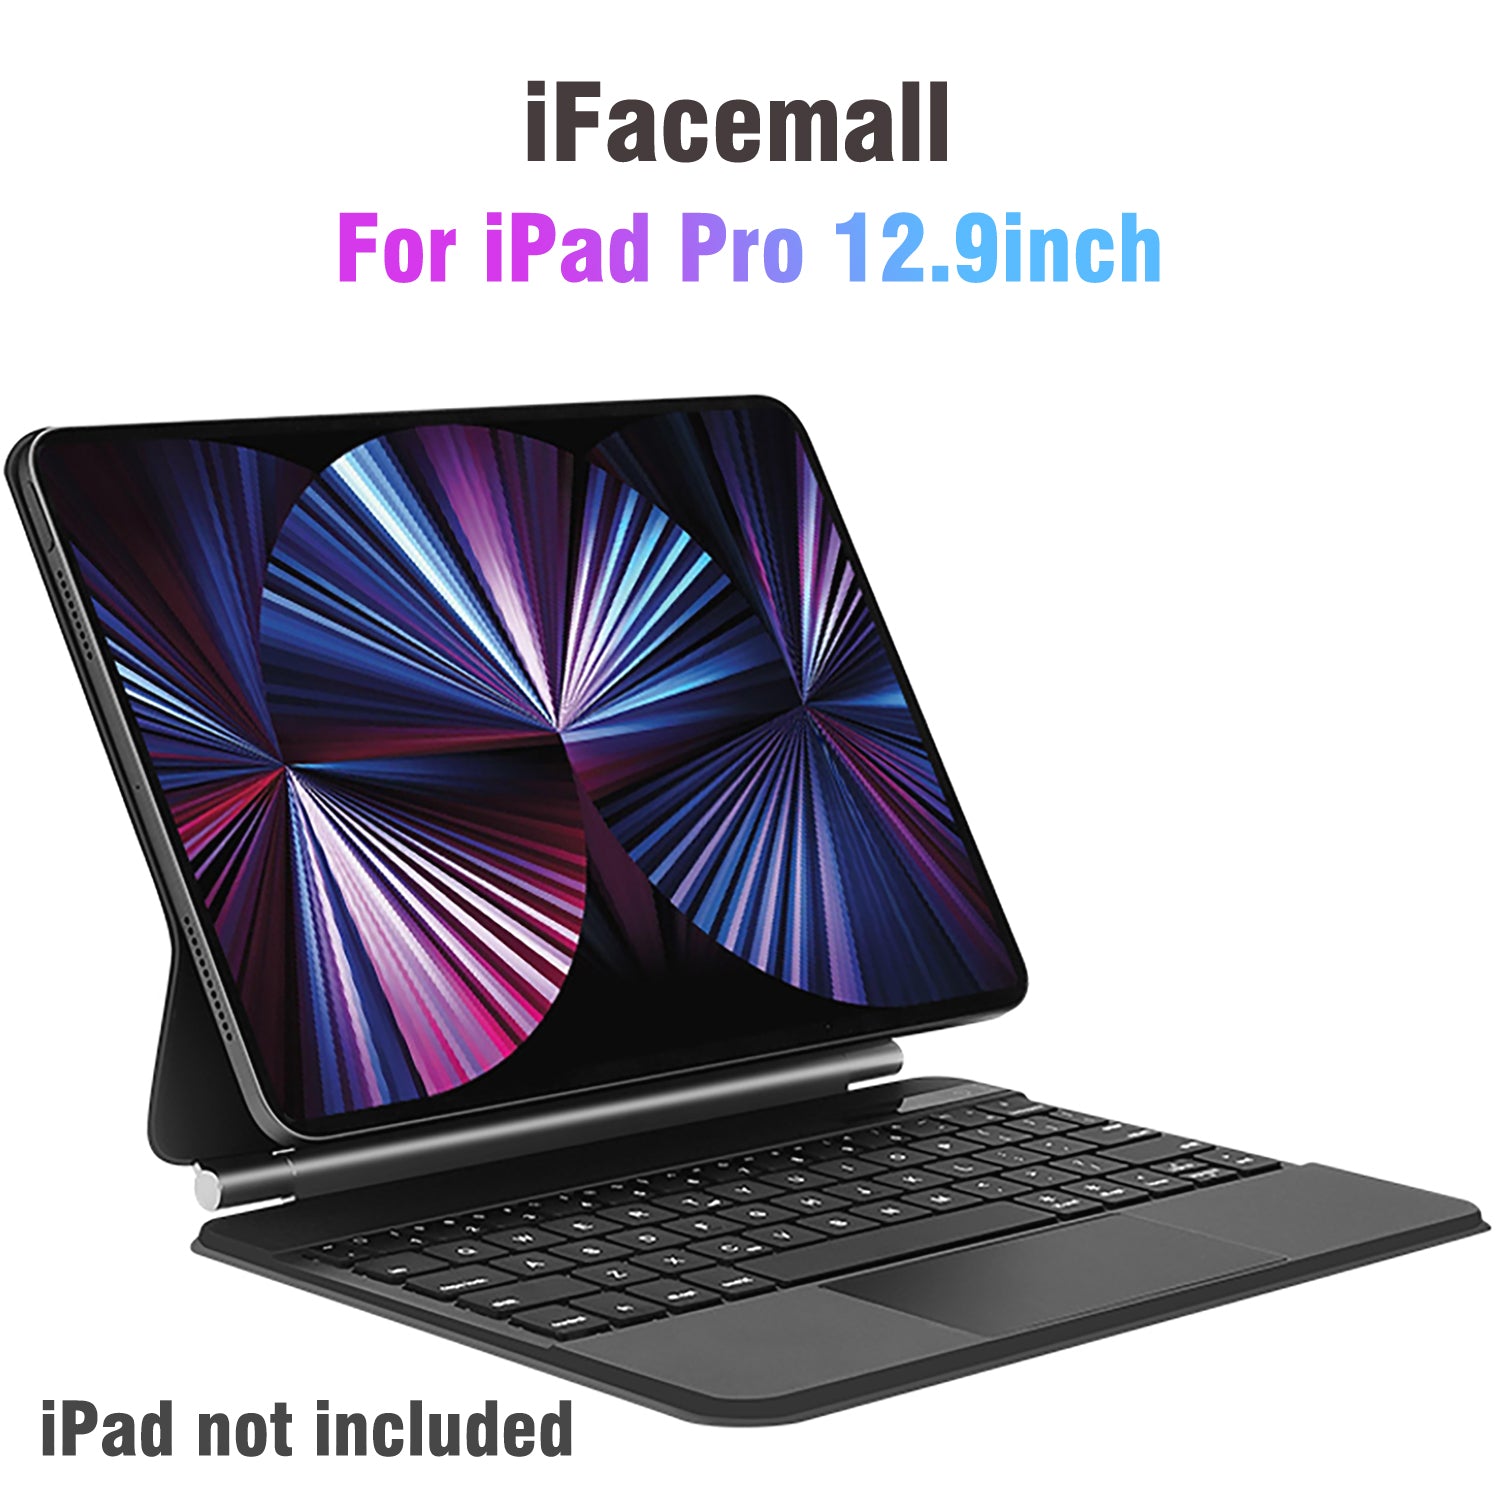 iFacemall Stylish Magic Case for iPad with Keyboard